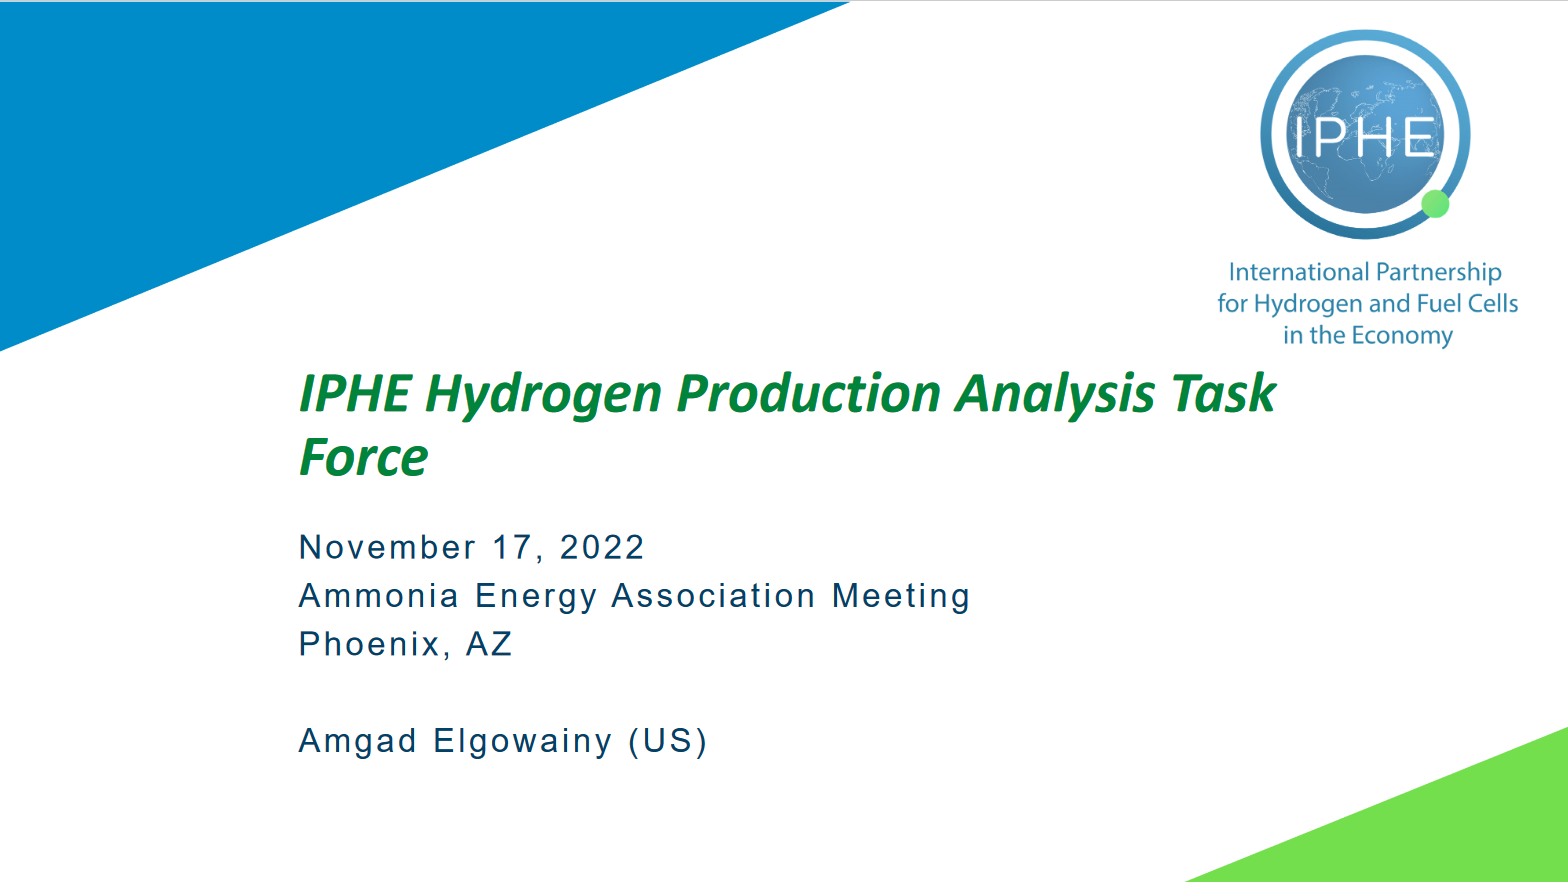 IPHE hydrogen production analysis task force